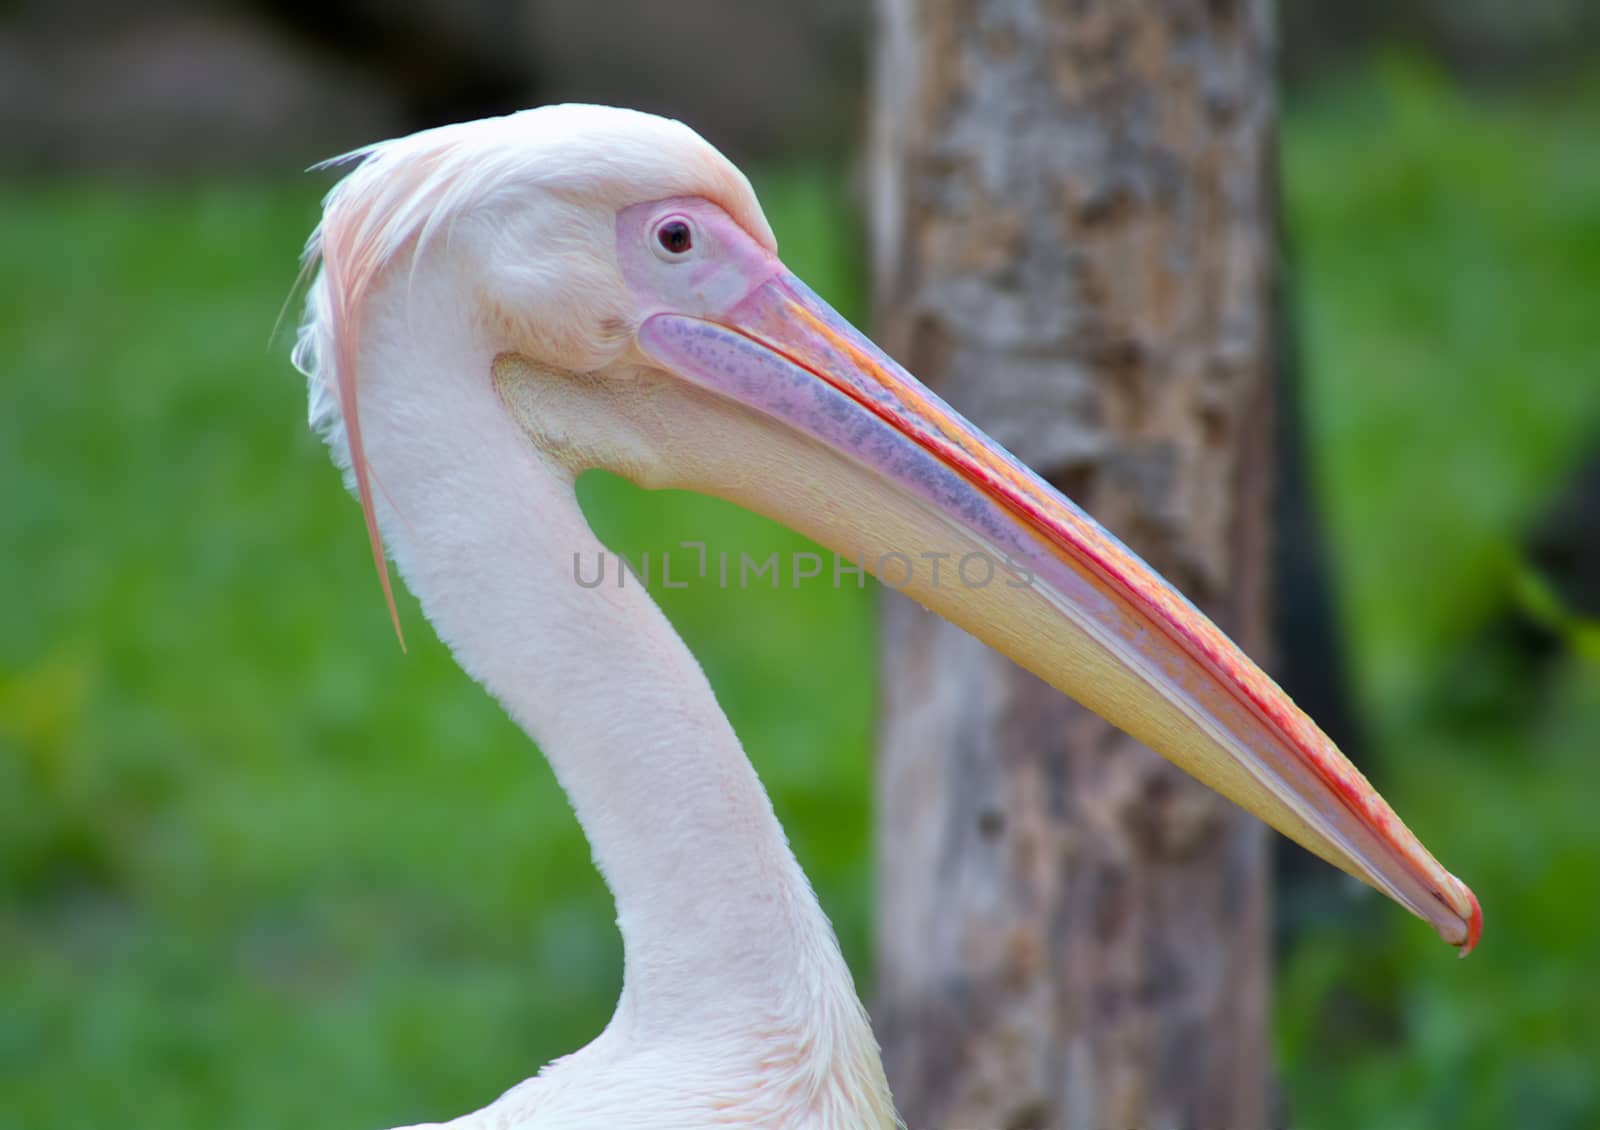 Pelicans are a large water birds. They are characterized by a long beak and a large throat pouch used for catching prey and draining water from the scooped-up contents before swallowing